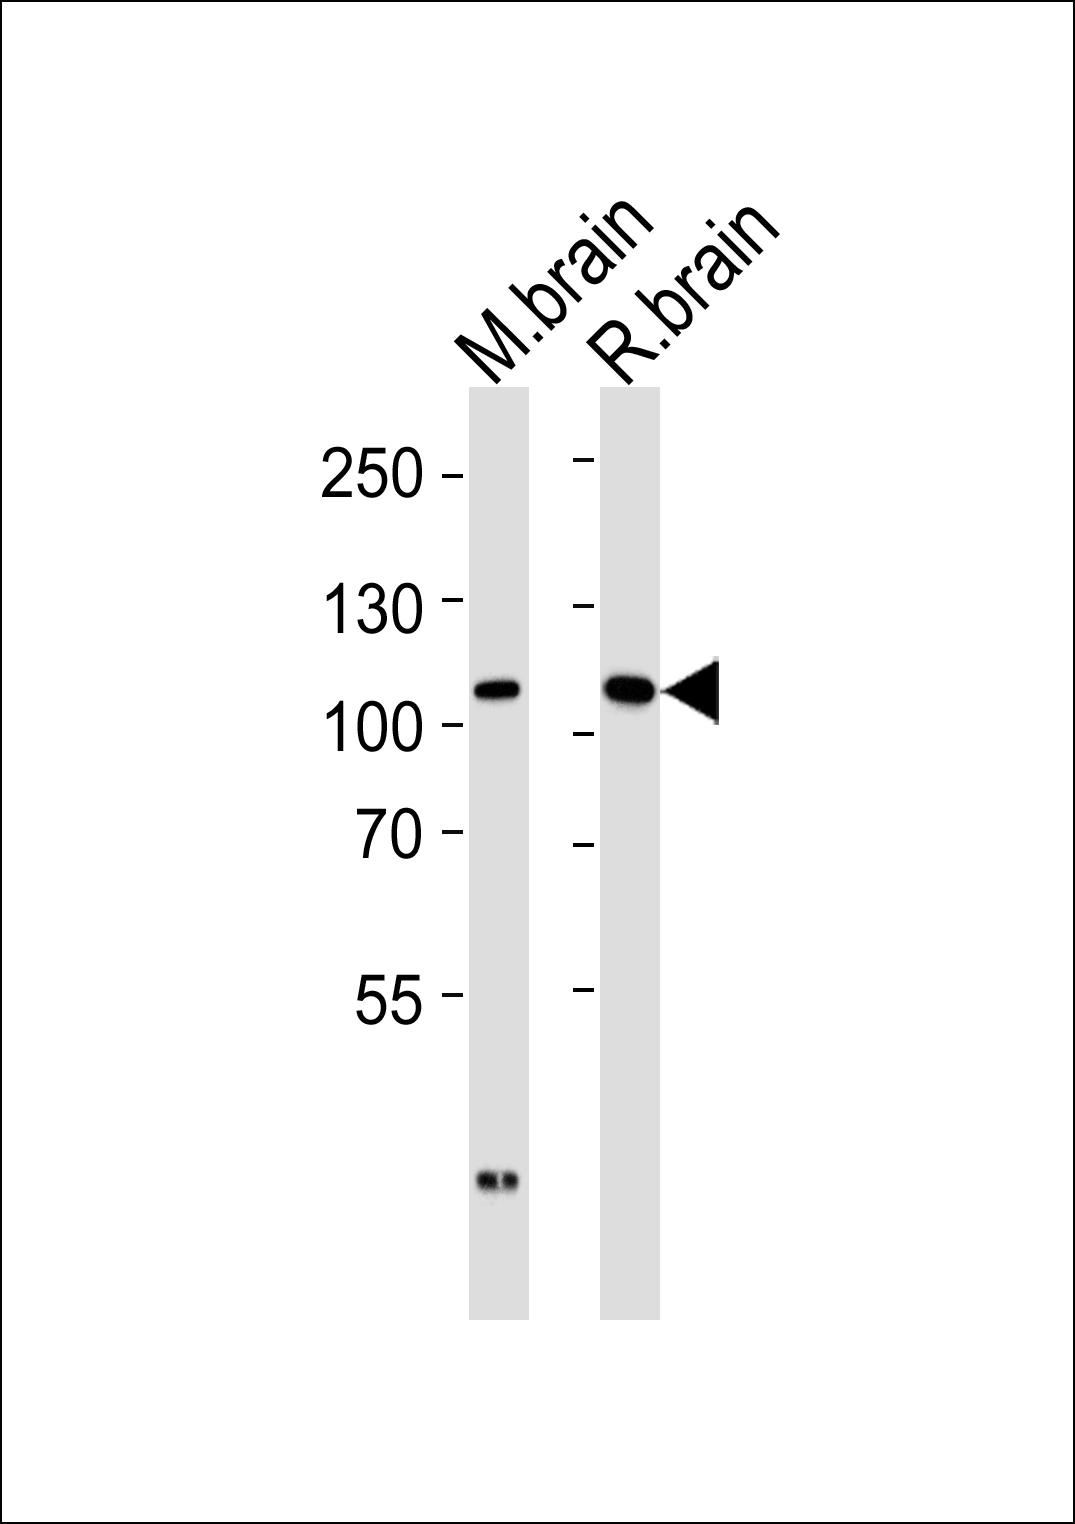 Western blot analysis of tissue lysates from mouse brain and rat brain  (from left to right), using DLG2 Antibody (Center)(Cat.  #AP20636c).  AP20636c was diluted at 1:1000 at each lane.  A goat anti-rabbit IgG H&L(HRP) at 1:5000 dilution was used as the secondary antibody. Lysates at 35ug per lane.